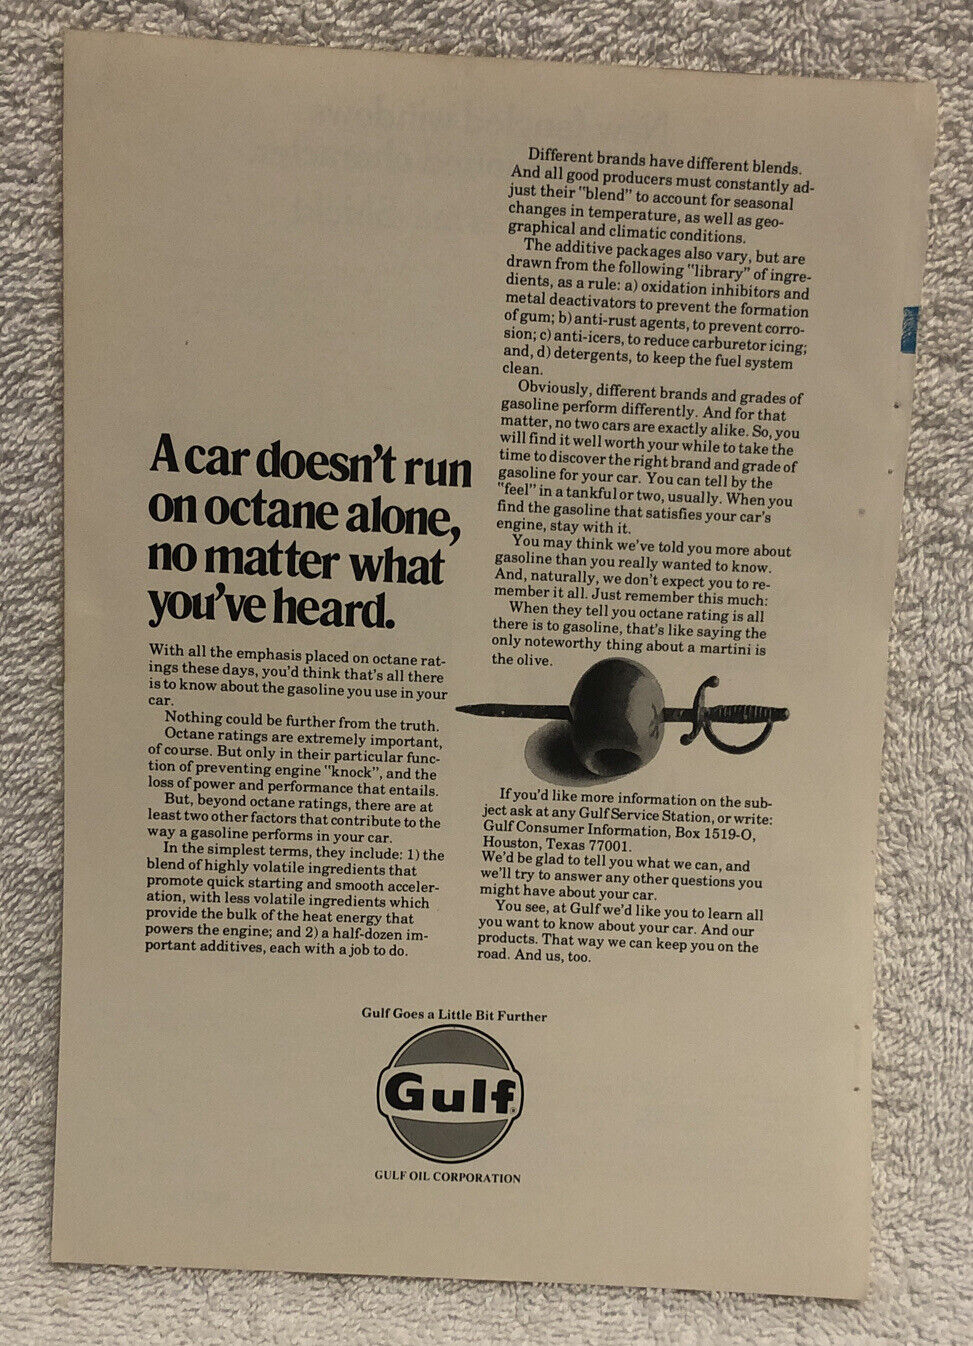 Vintage 1974 Gulf Oil Original Print Ad - Full Page - Doesn’t Run On Octane